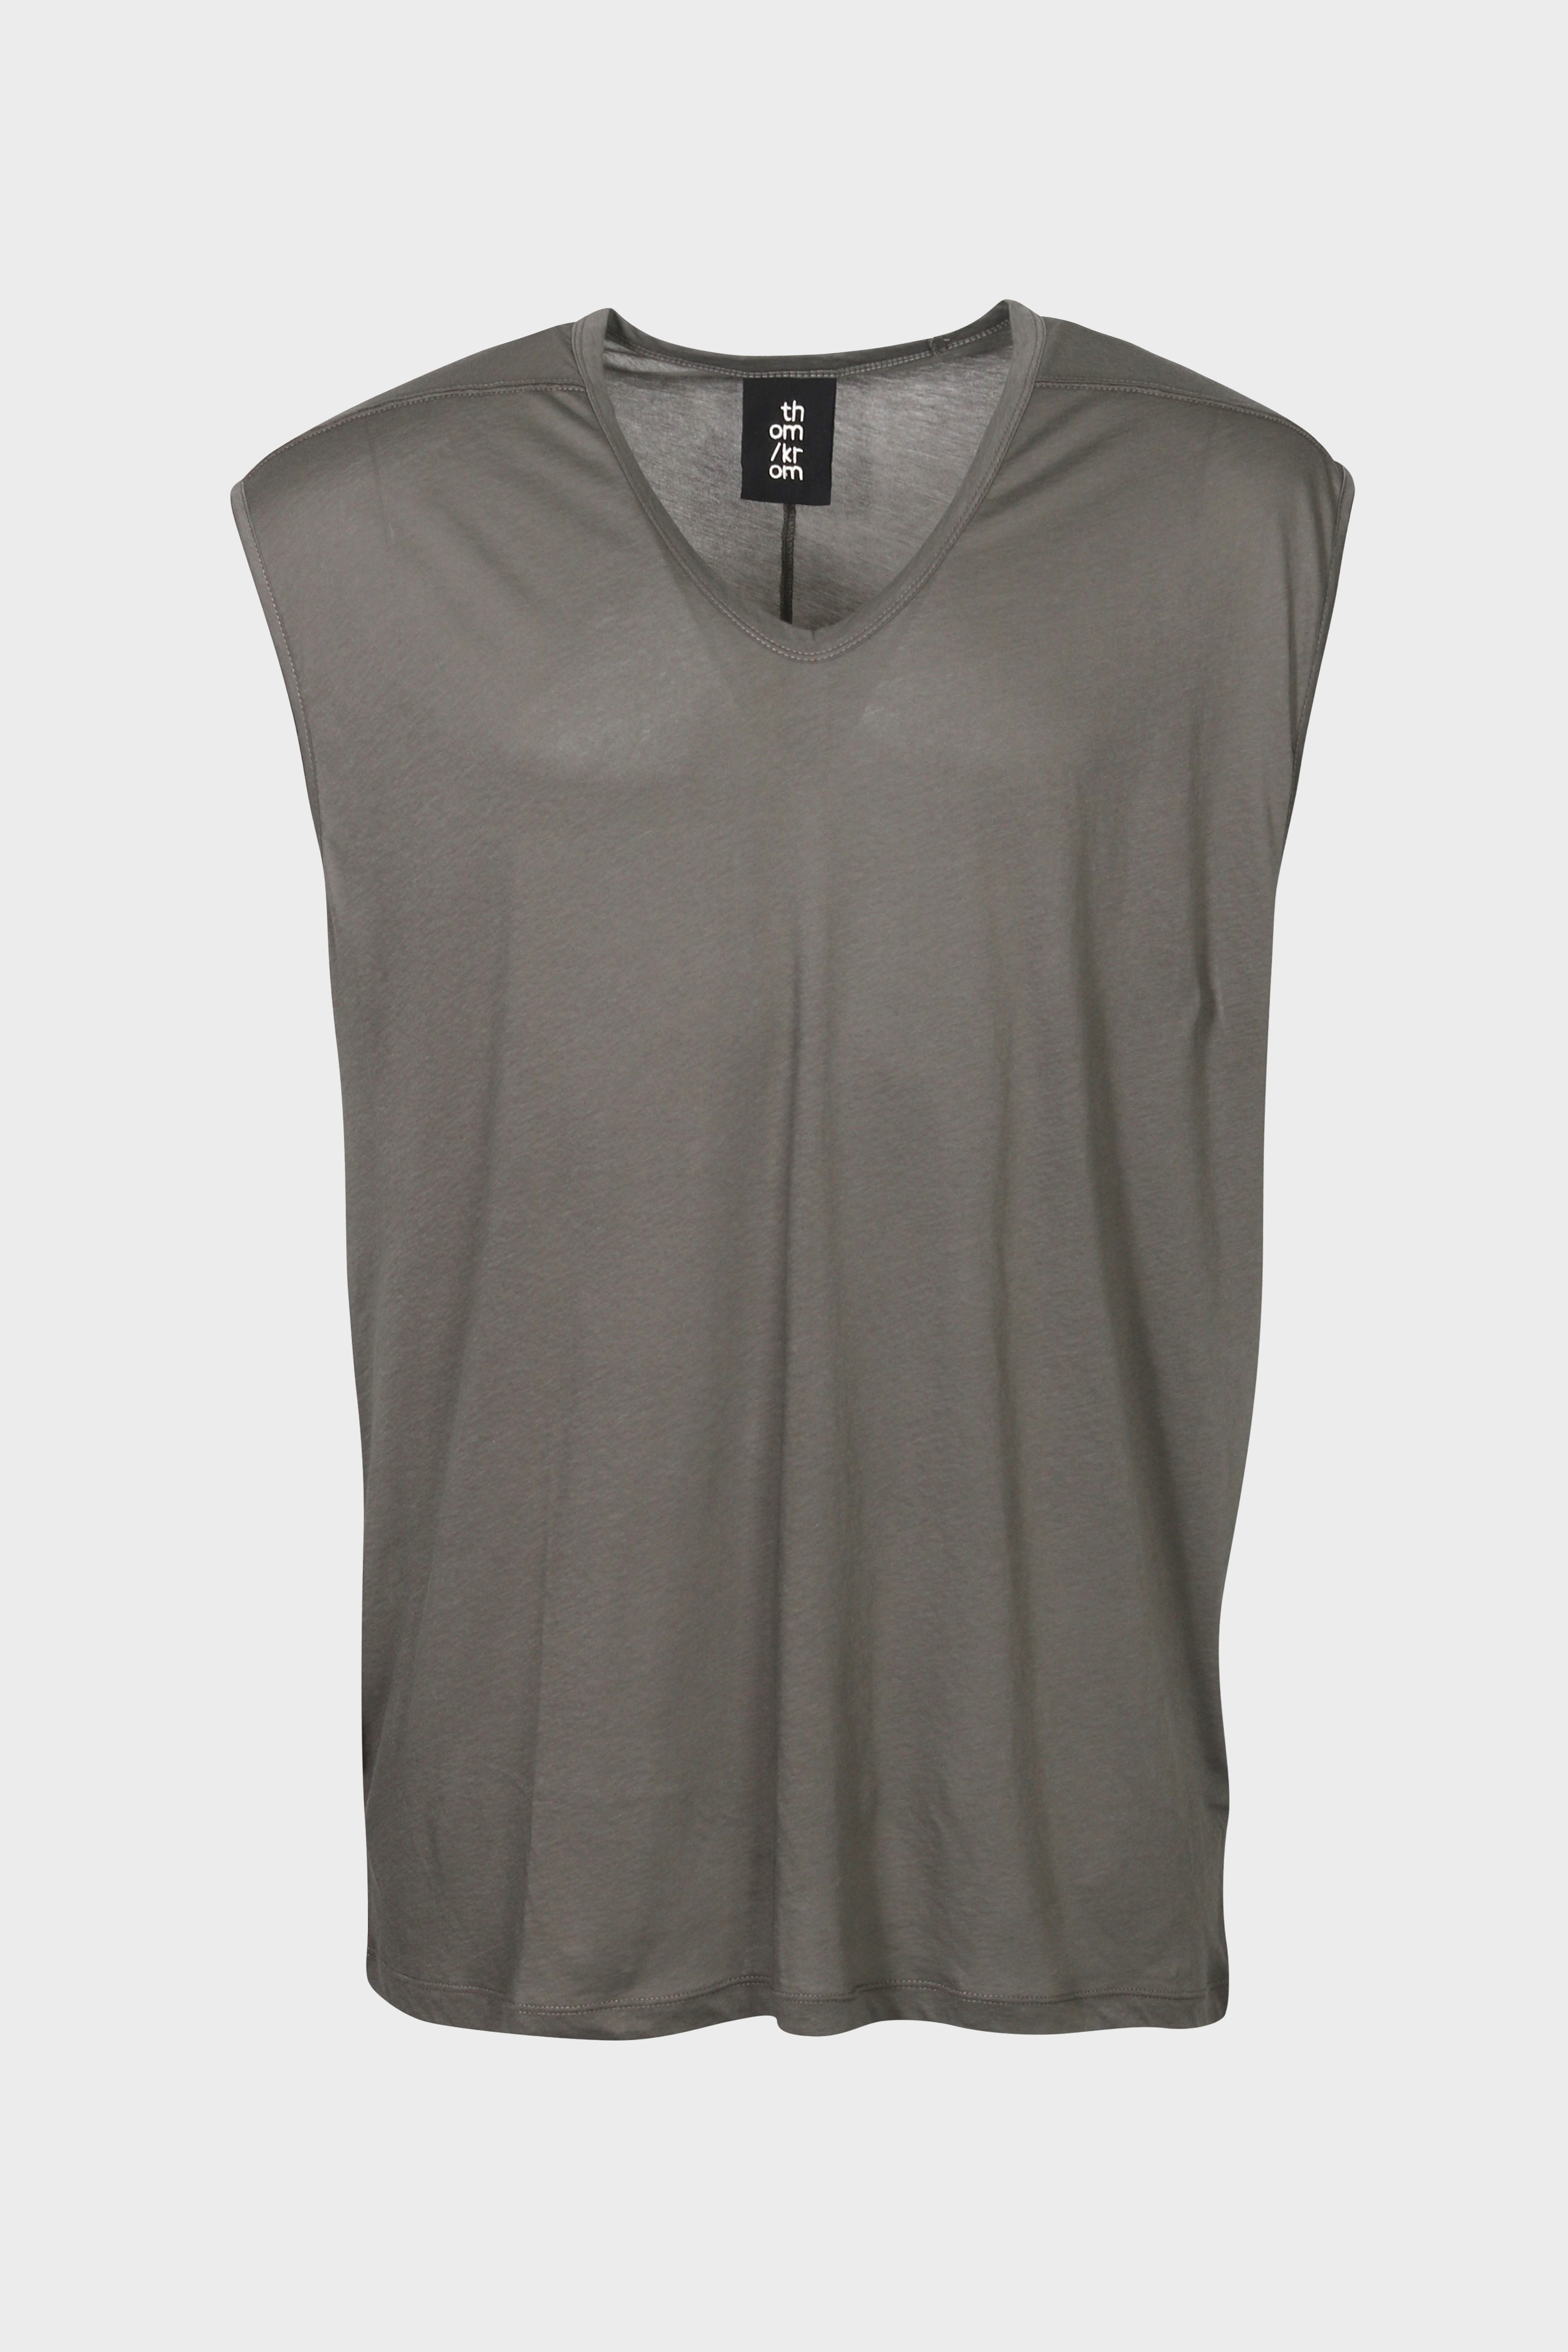 THOM KROM Muscle Shirt in Ivy Green